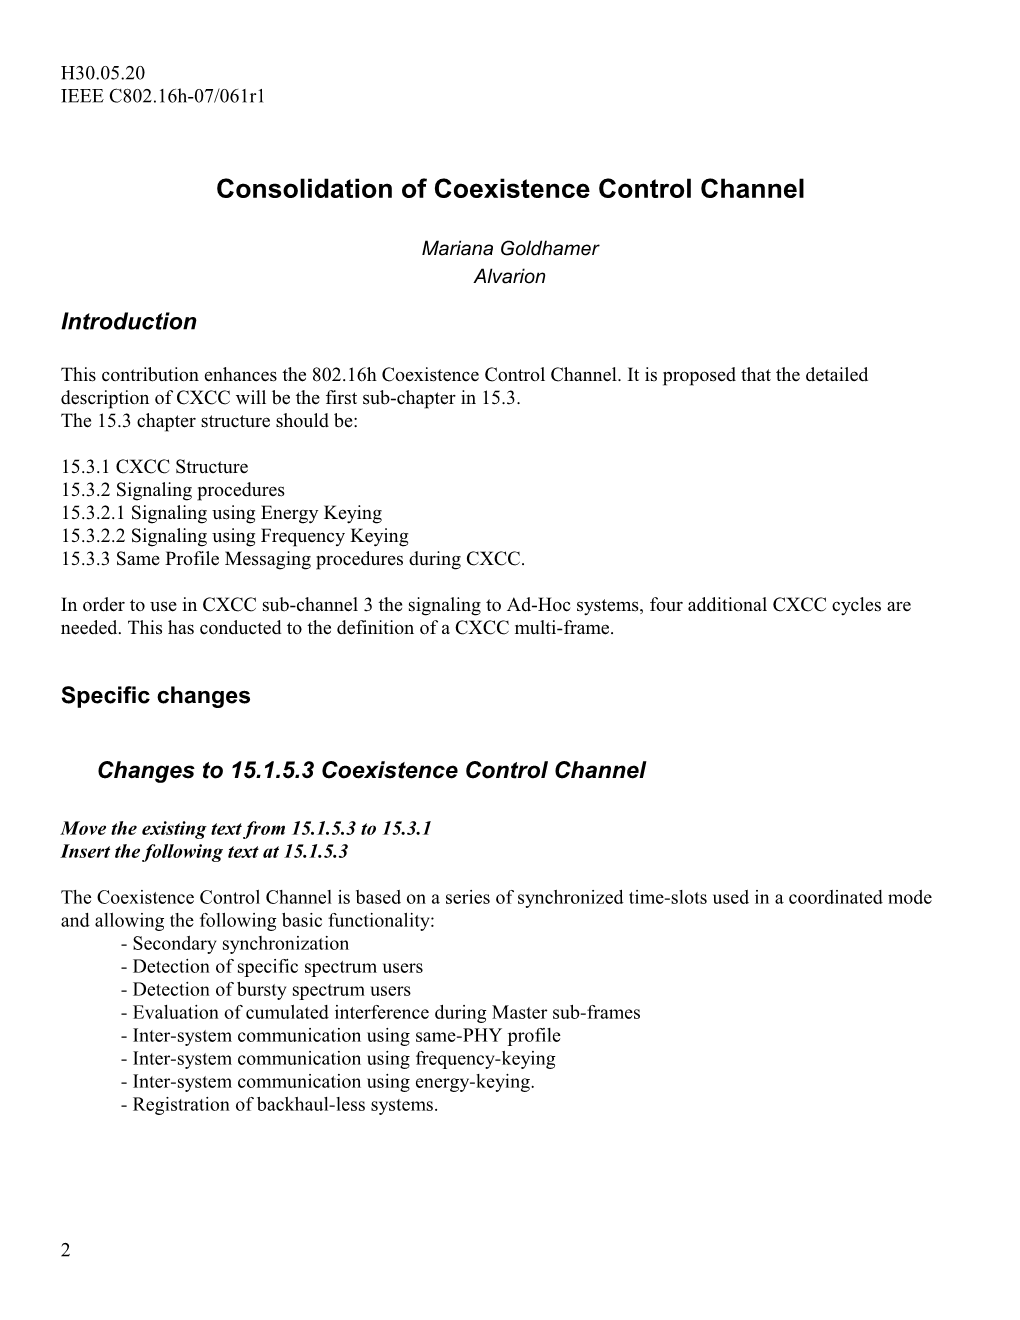 Consolidation of Coexistence Control Channel